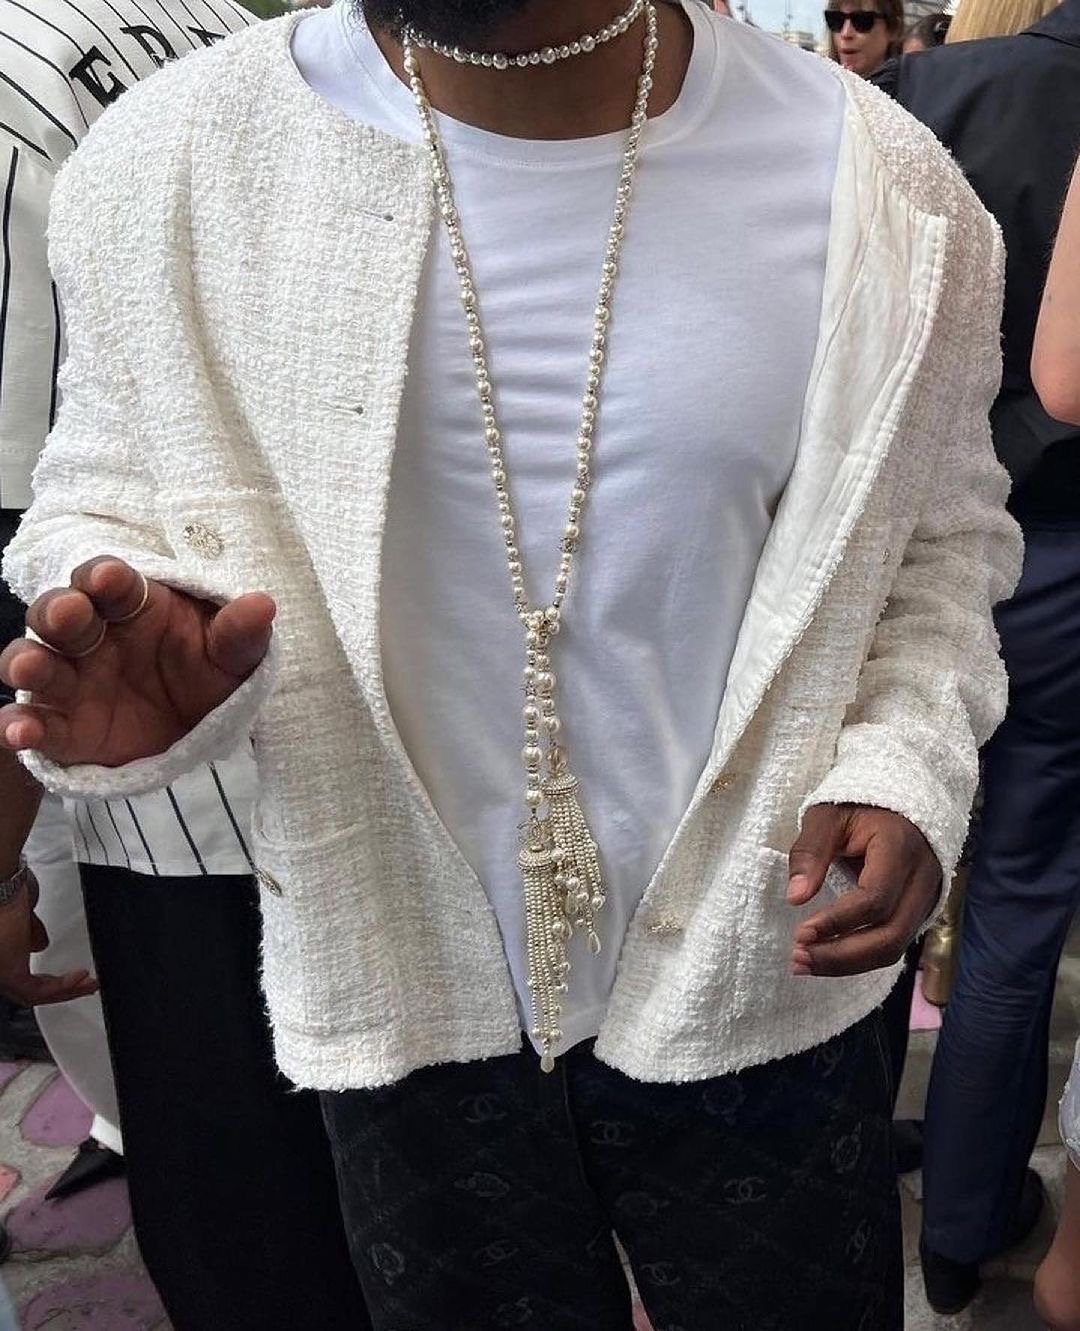 Kendrick Lamar Goes All-In on Chanel at Paris Couture Week – Robb